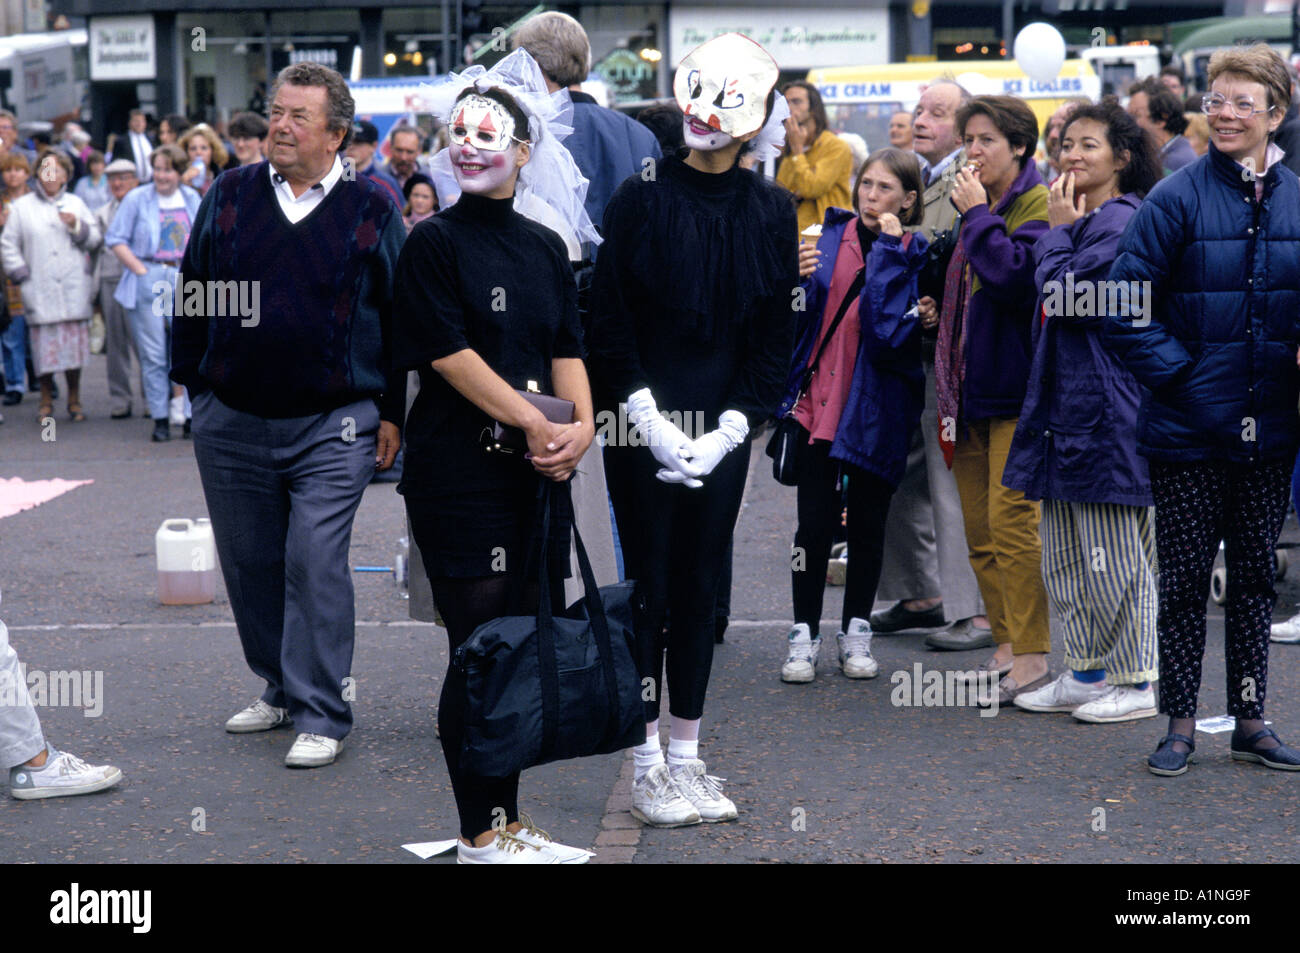 PERFORMERS IN B W COSTUMES EYE MASKS FACE PAINT IN A STREET PERFORMANCE PASSERBYS LOOK ON EDINBURGH FRINGE FESTIVAL Stock Photo